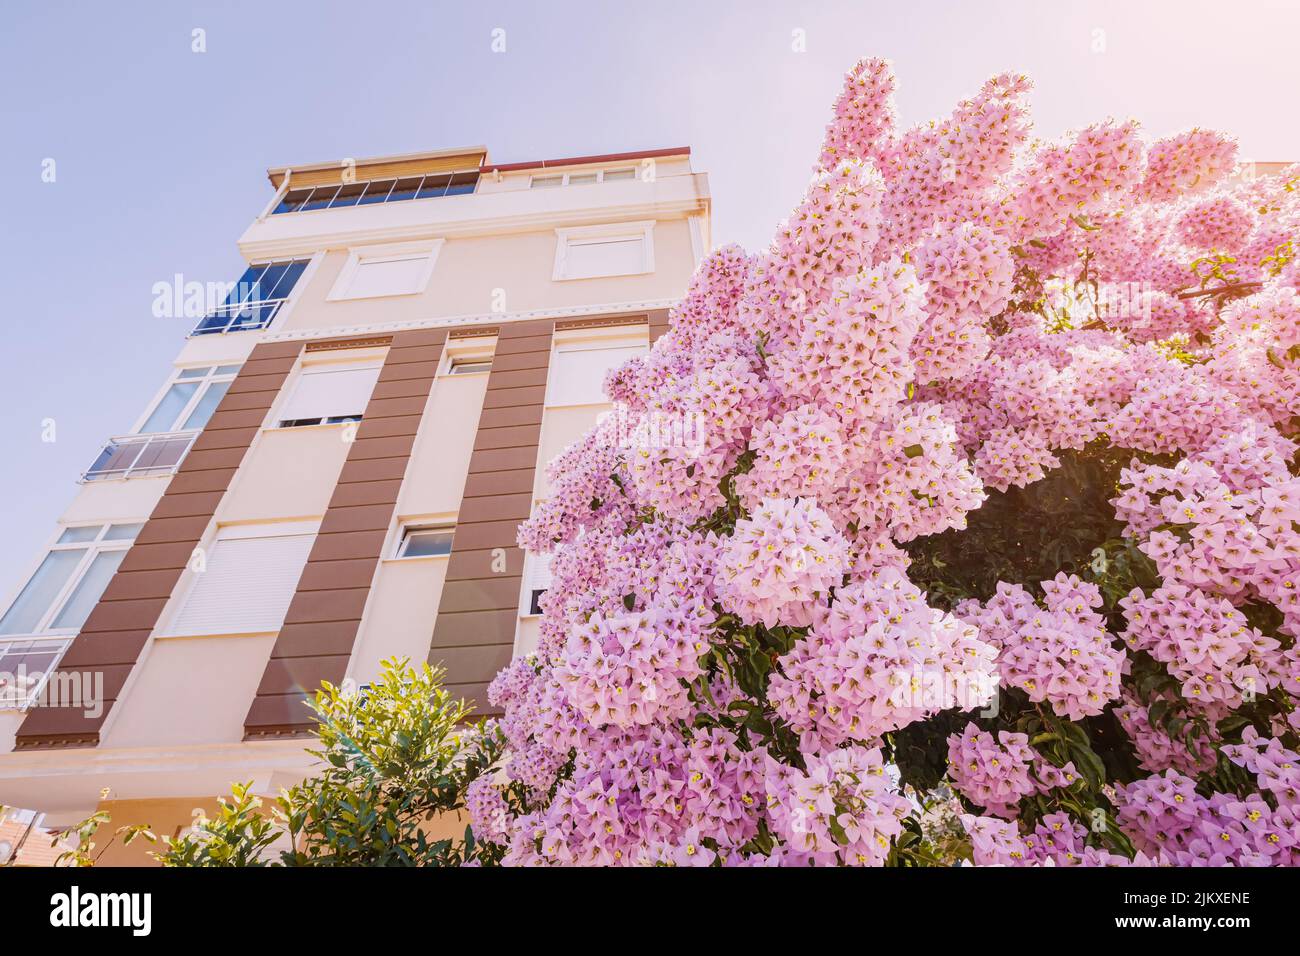 Bougainvillea blooms at the entrance to a house with apartments or a hotel in a tropical resort country. Real estate investments Stock Photo